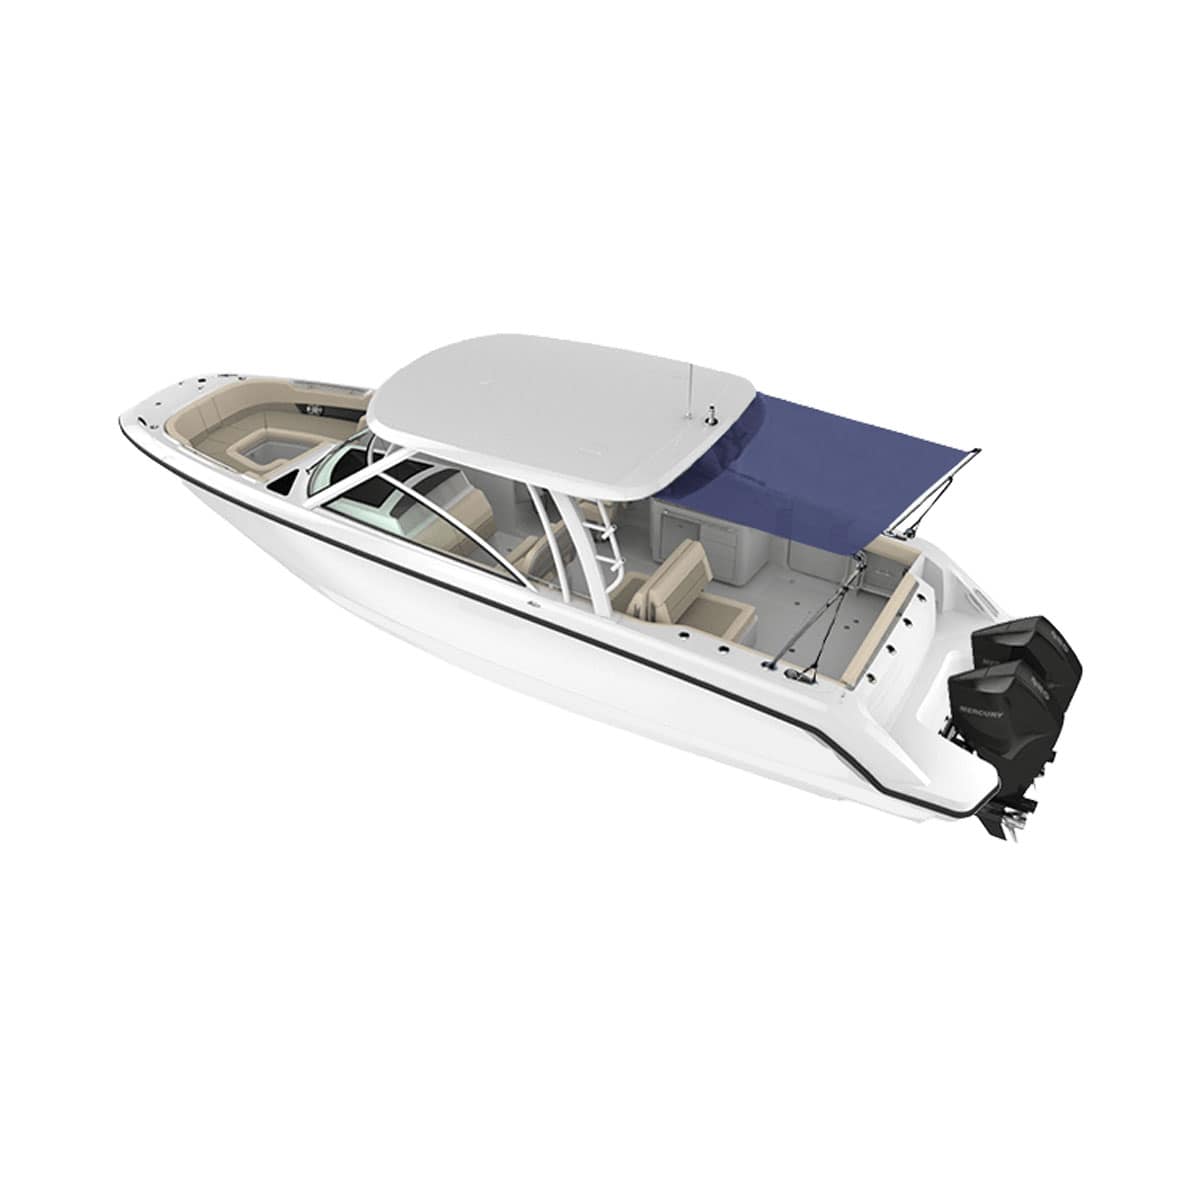 Extend Shade with Hard Top Stern Extension Kit